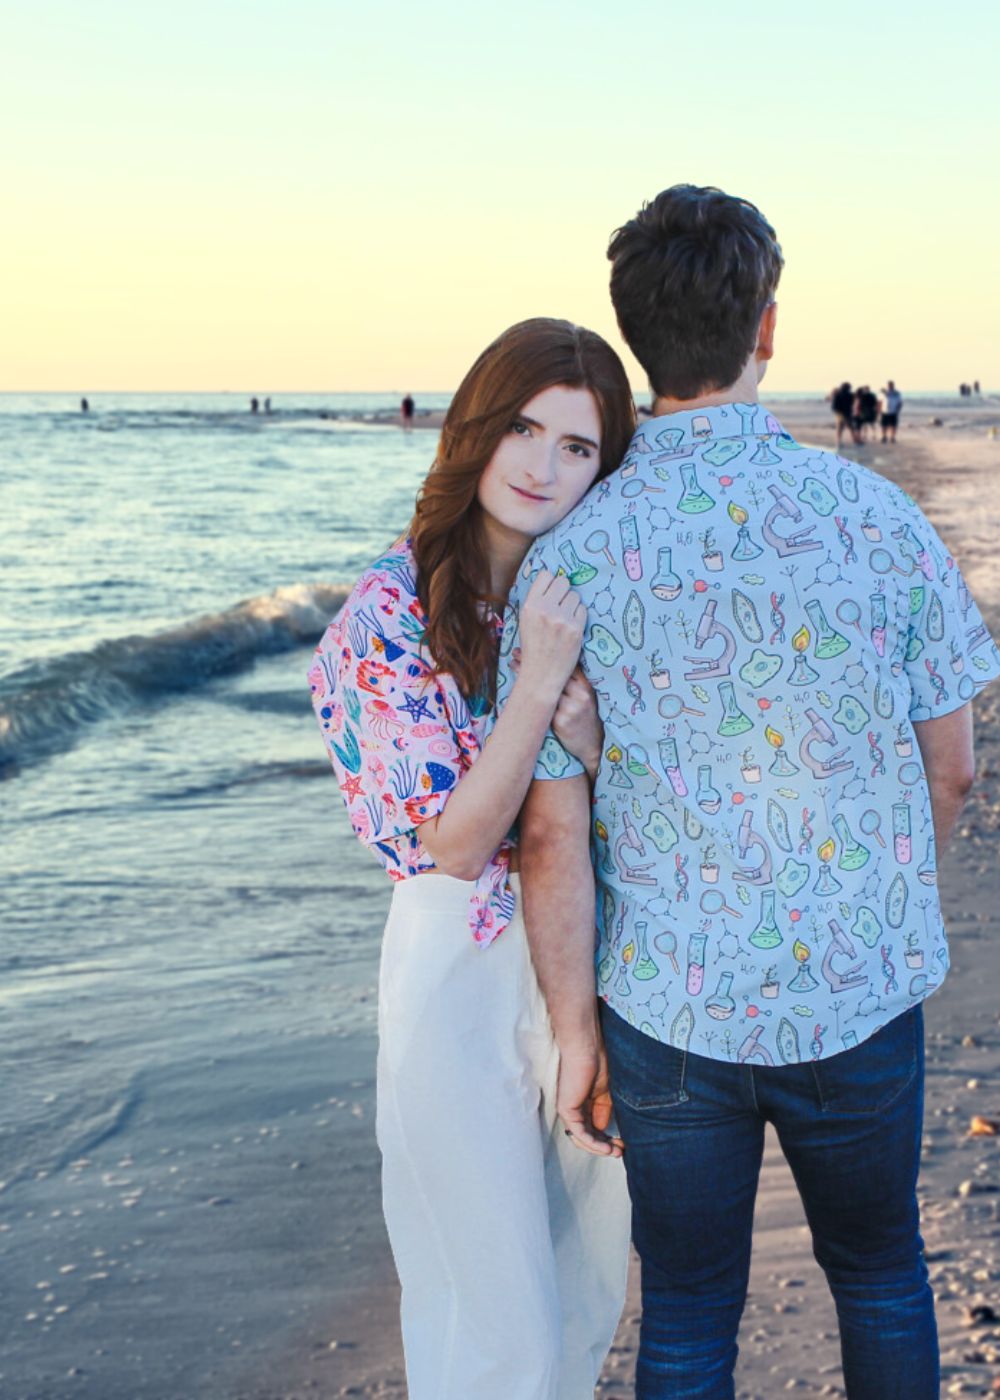 A couple wearing nerdy science button up shirts standing on the beach during a beautiful sunset. They are holding hands and smiling at each other while the waves are crashing behind them. The man's shirt has a pattern of DNA strands and the woman's shirt has a print of the periodic table.